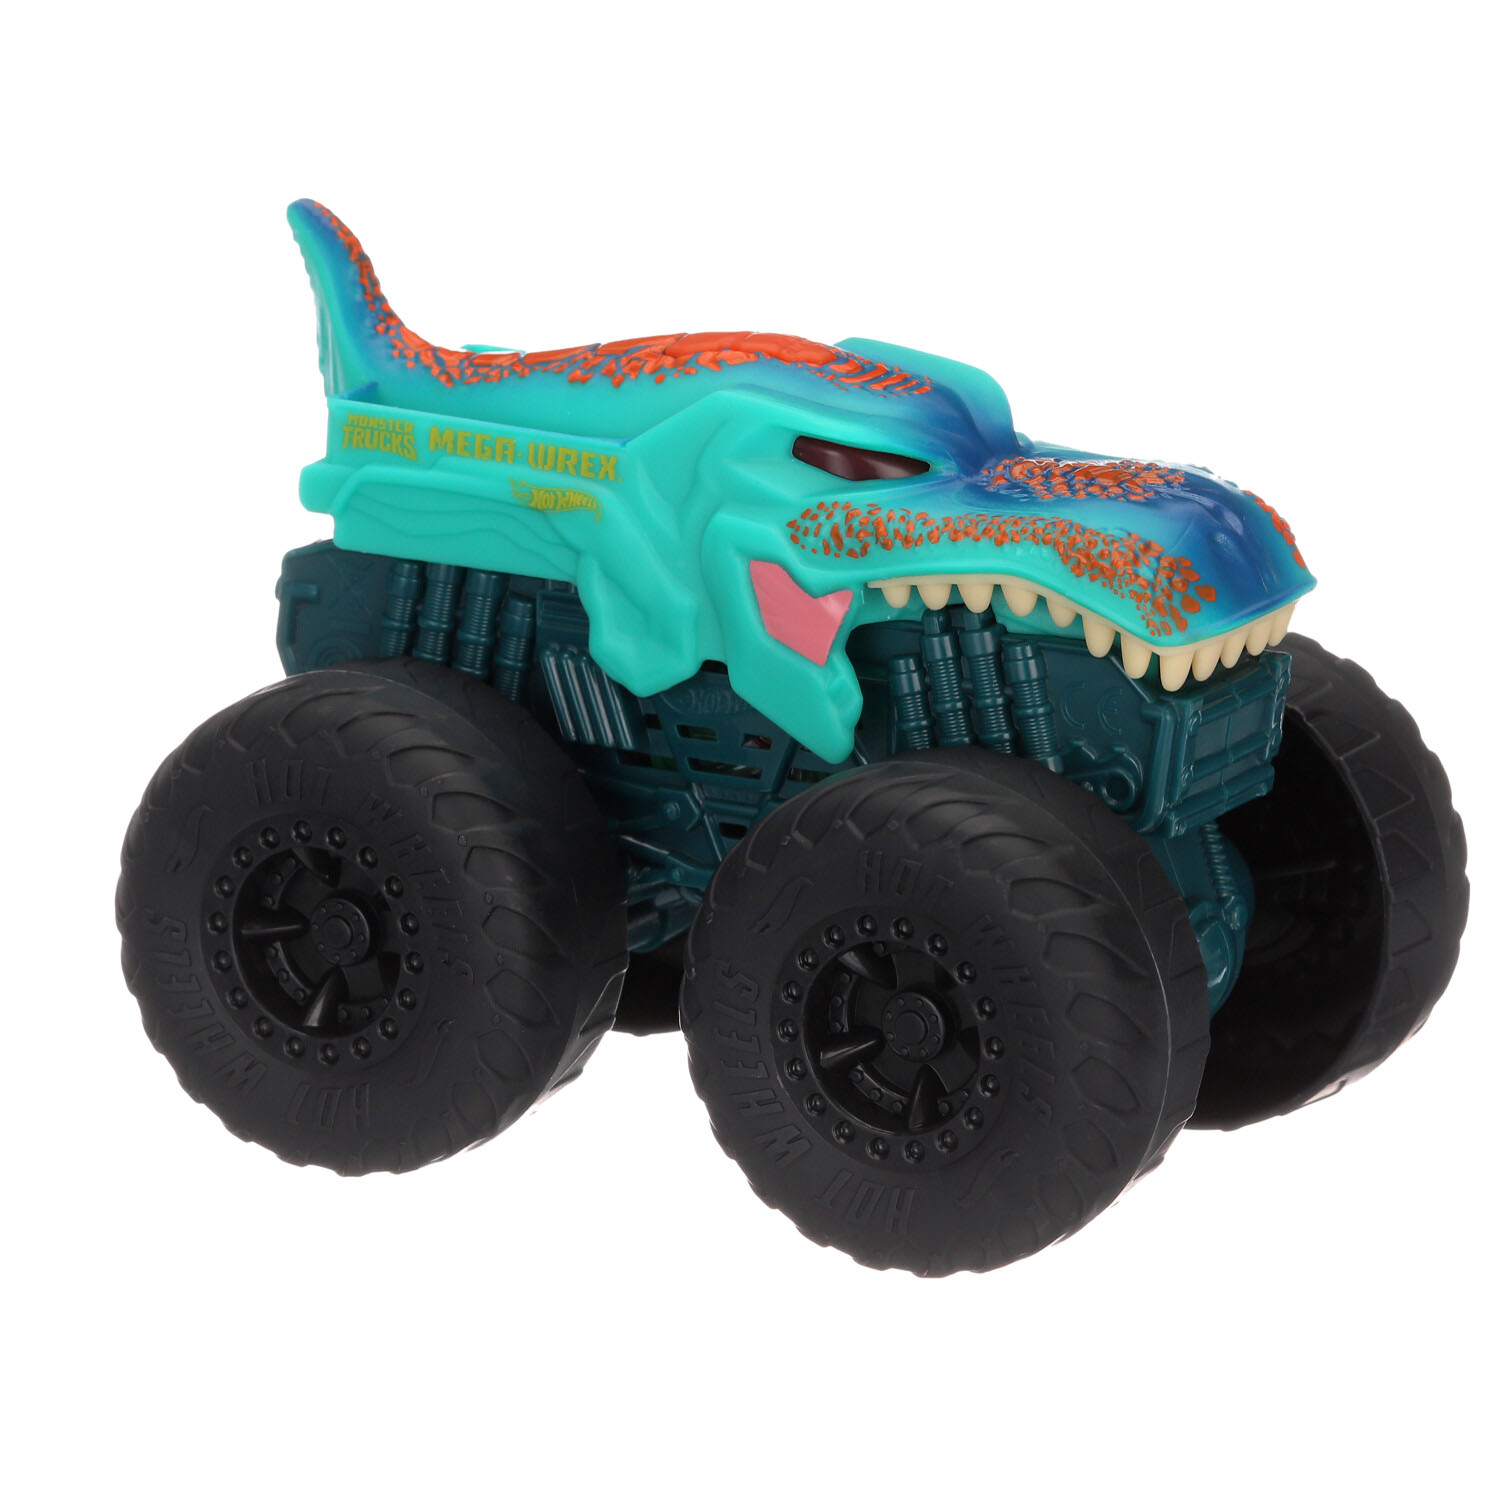 DieCast Hot Wheels Monster Trucks Mega Wrex (Teal) 31/75 - 1:64 Scale Truck  with Connect and Crash Car